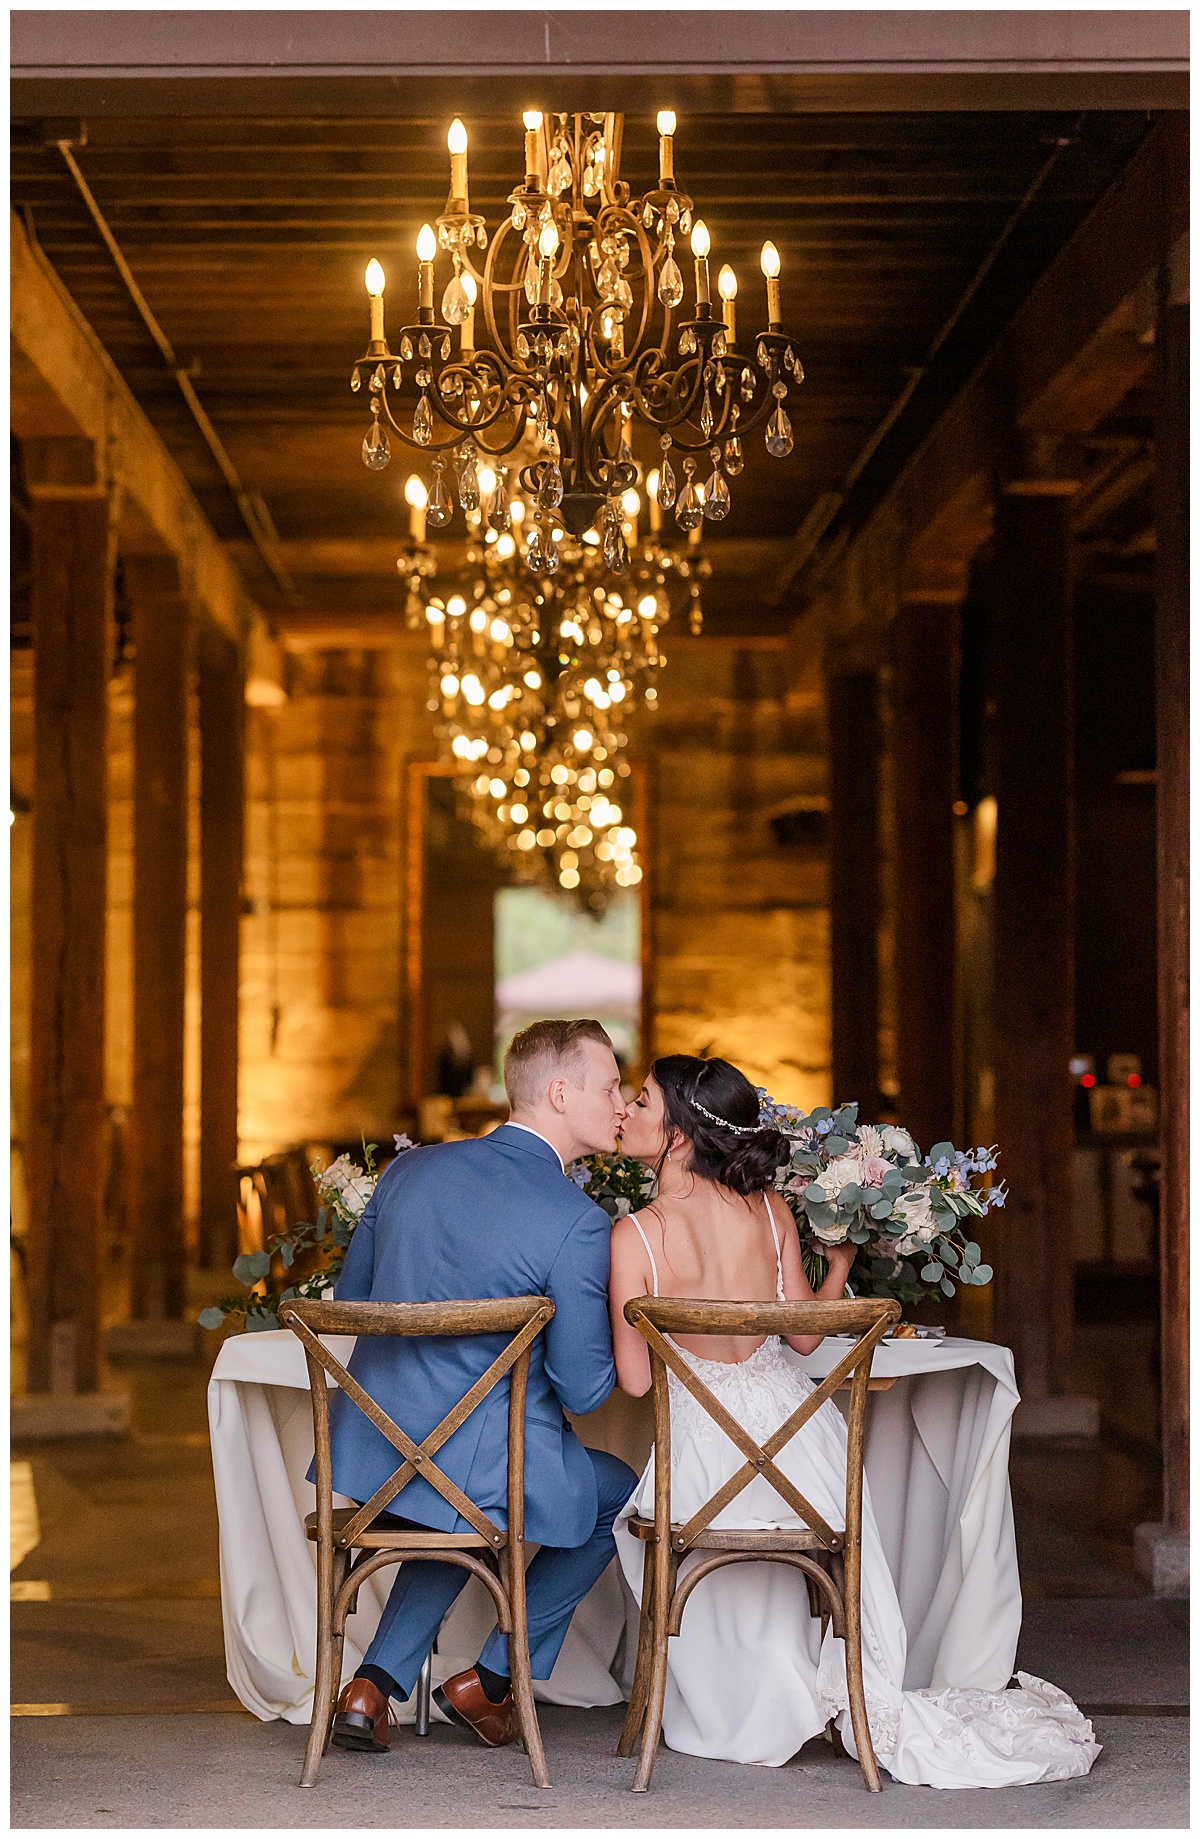 BRIDE AND GROOM KISSING AT SWEETHEART TABLE